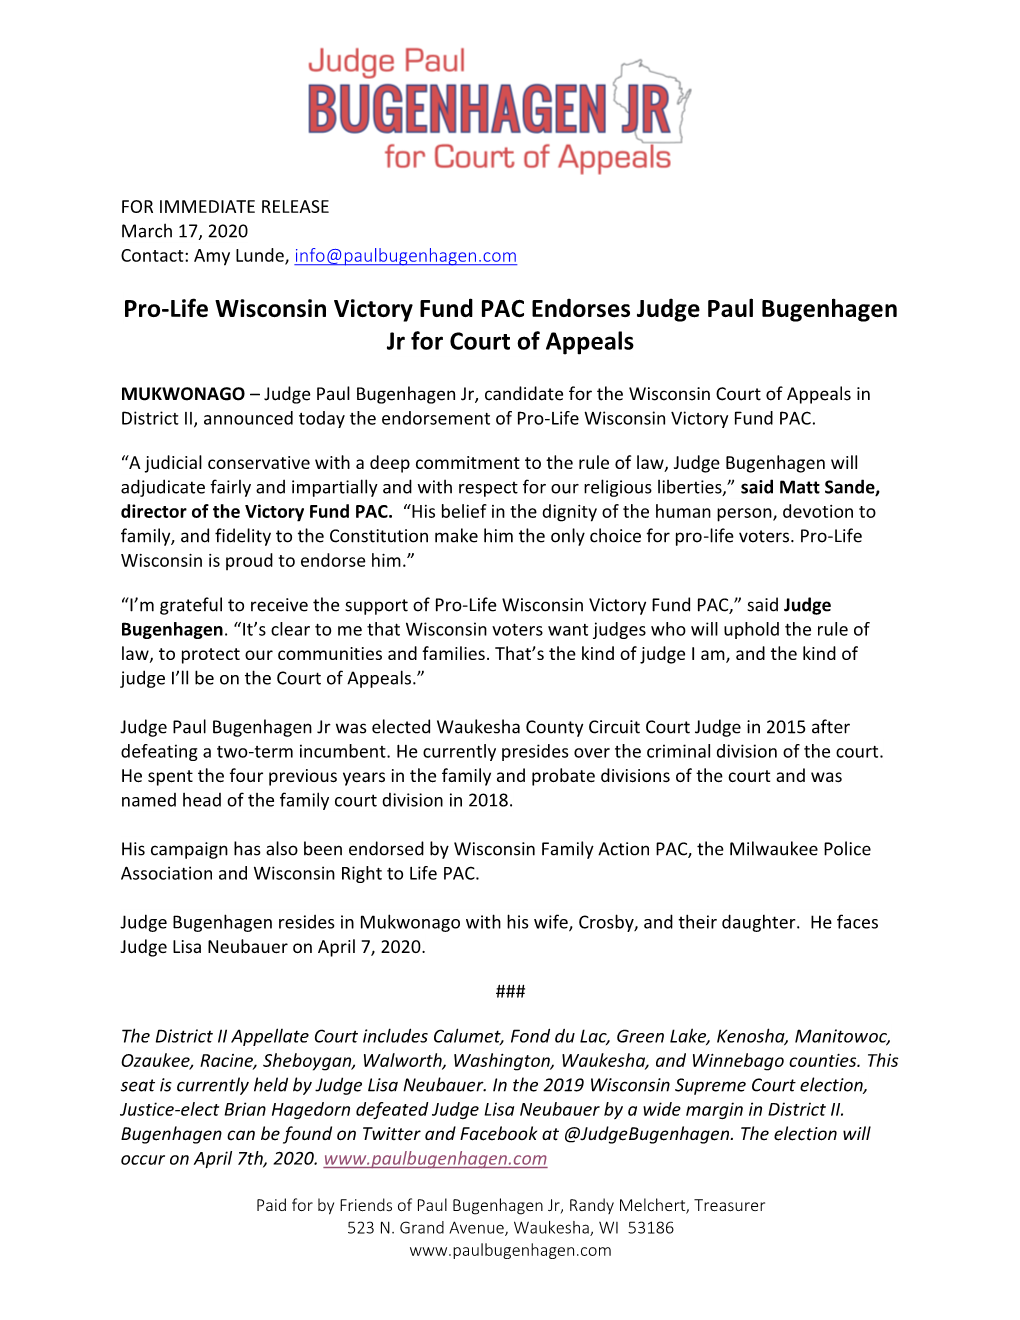 Pro-Life Wisconsin Victory Fund PAC Endorses Judge Paul Bugenhagen Jr for Court of Appeals